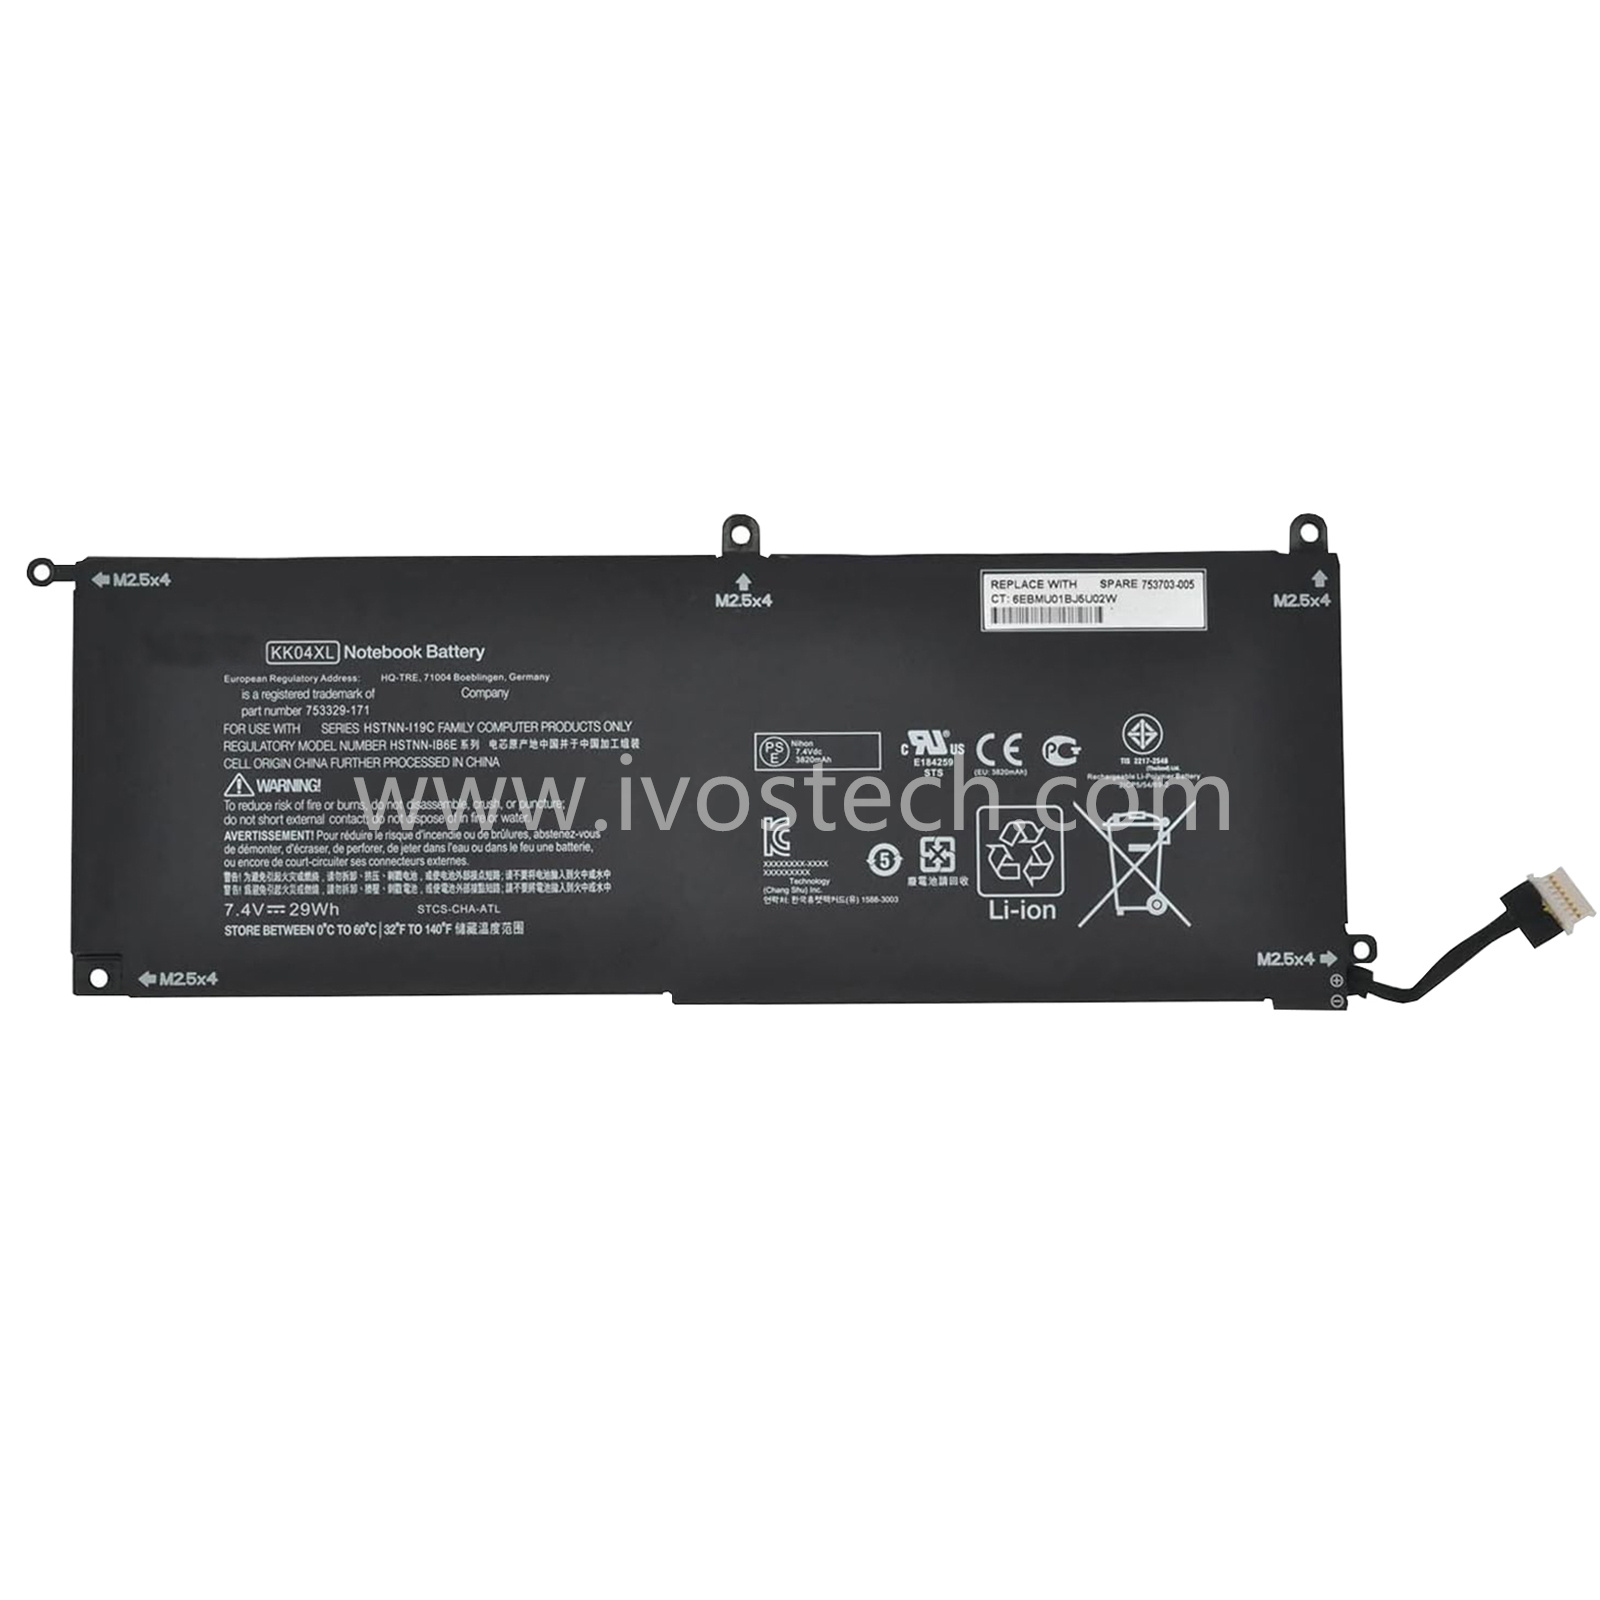 KK04XL 29Wh 7.4V Replacement Laptop Battery for HP Pro X2 612 G1 Tablet PC Series